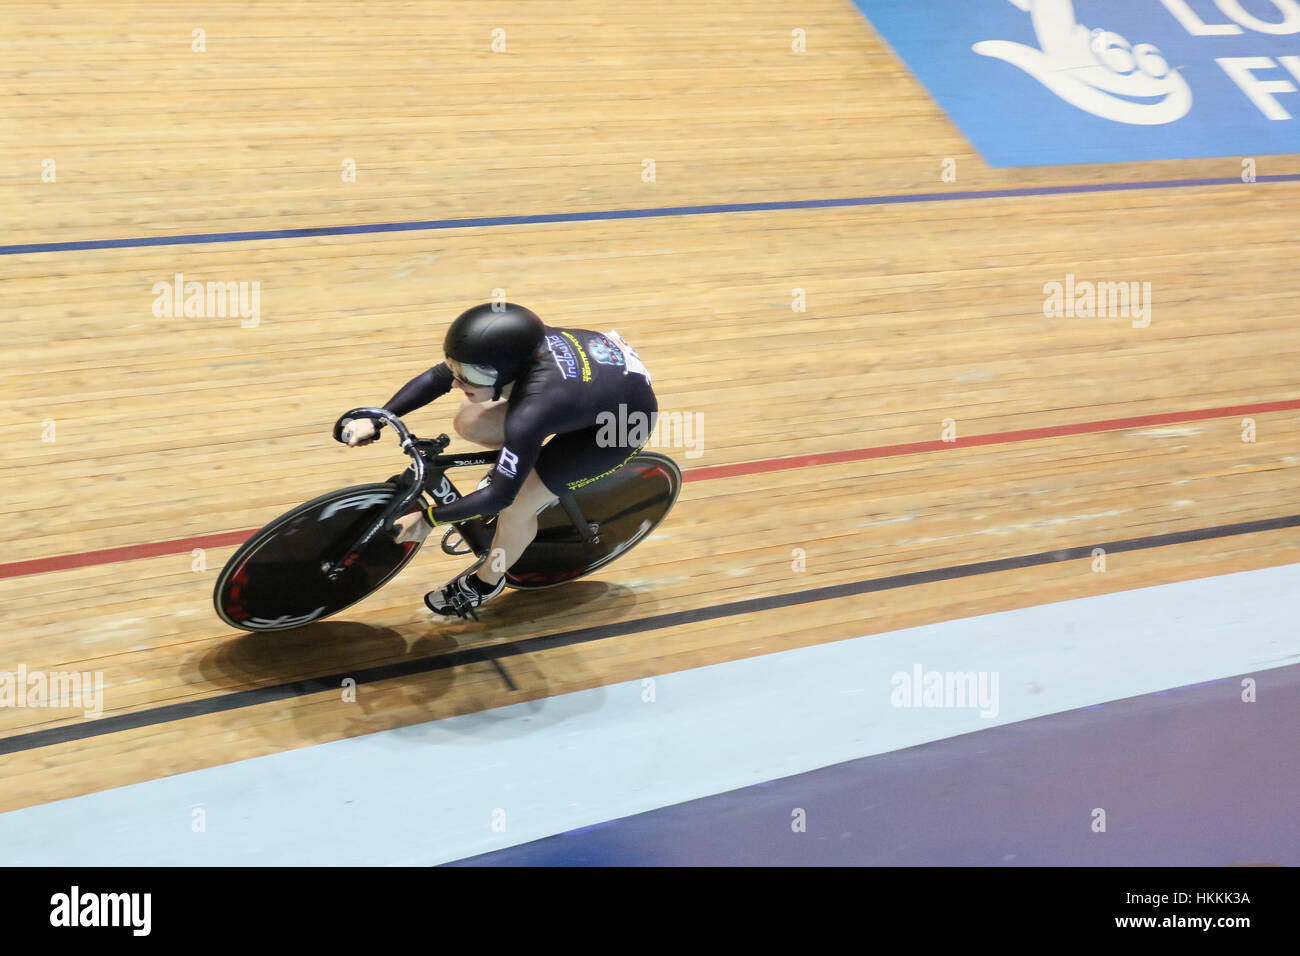 Manchester, UK. 29th January 2017. Team Terminator take gold in the womens team sprint5 during 2017 HSBC UK National Track Championships Day Three at National Cycling Centre, Manchester.  Photo by Dan Cooke. 29 January 2017   Credit: Dan Cooke/Alamy Live News Stock Photo